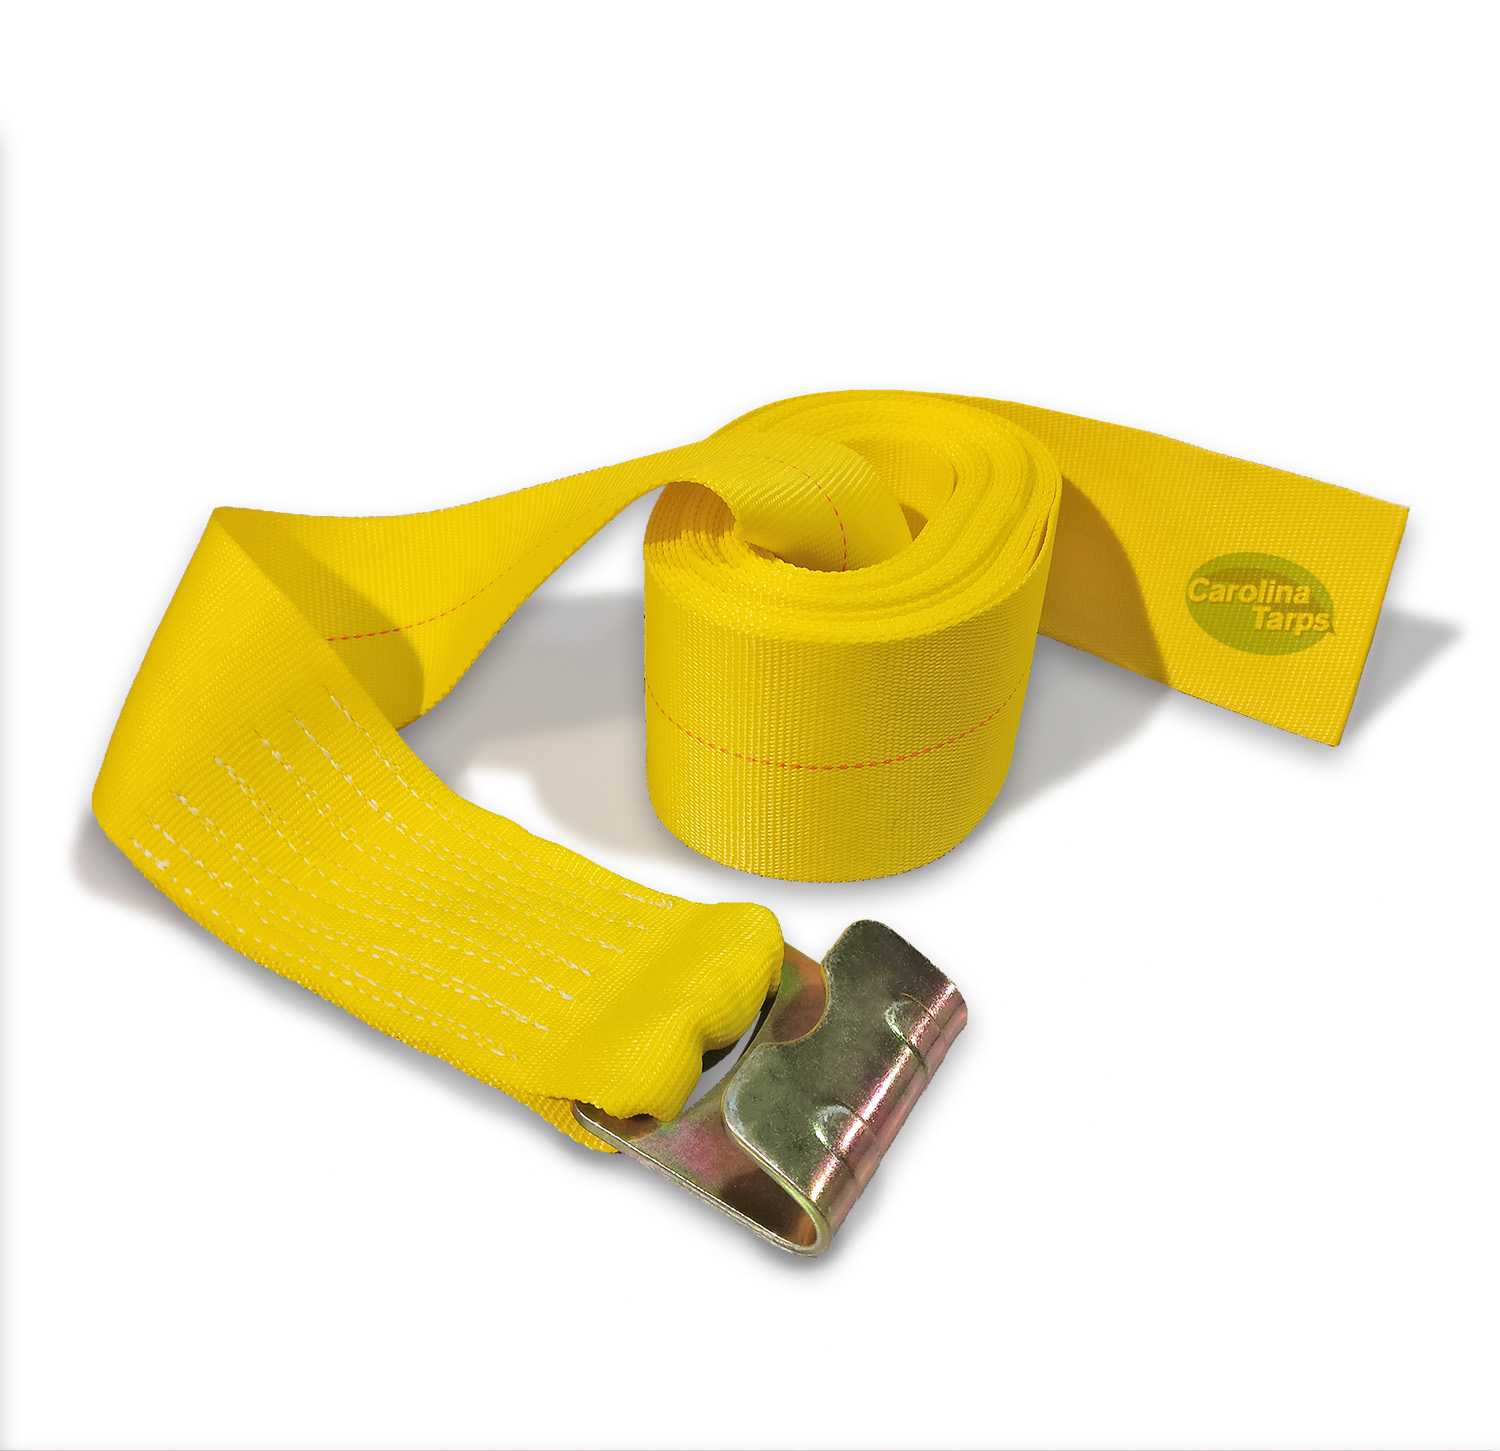 8-Pack of 4" x 30' Heavy-Duty Ratchet Strap with Flat Hook 